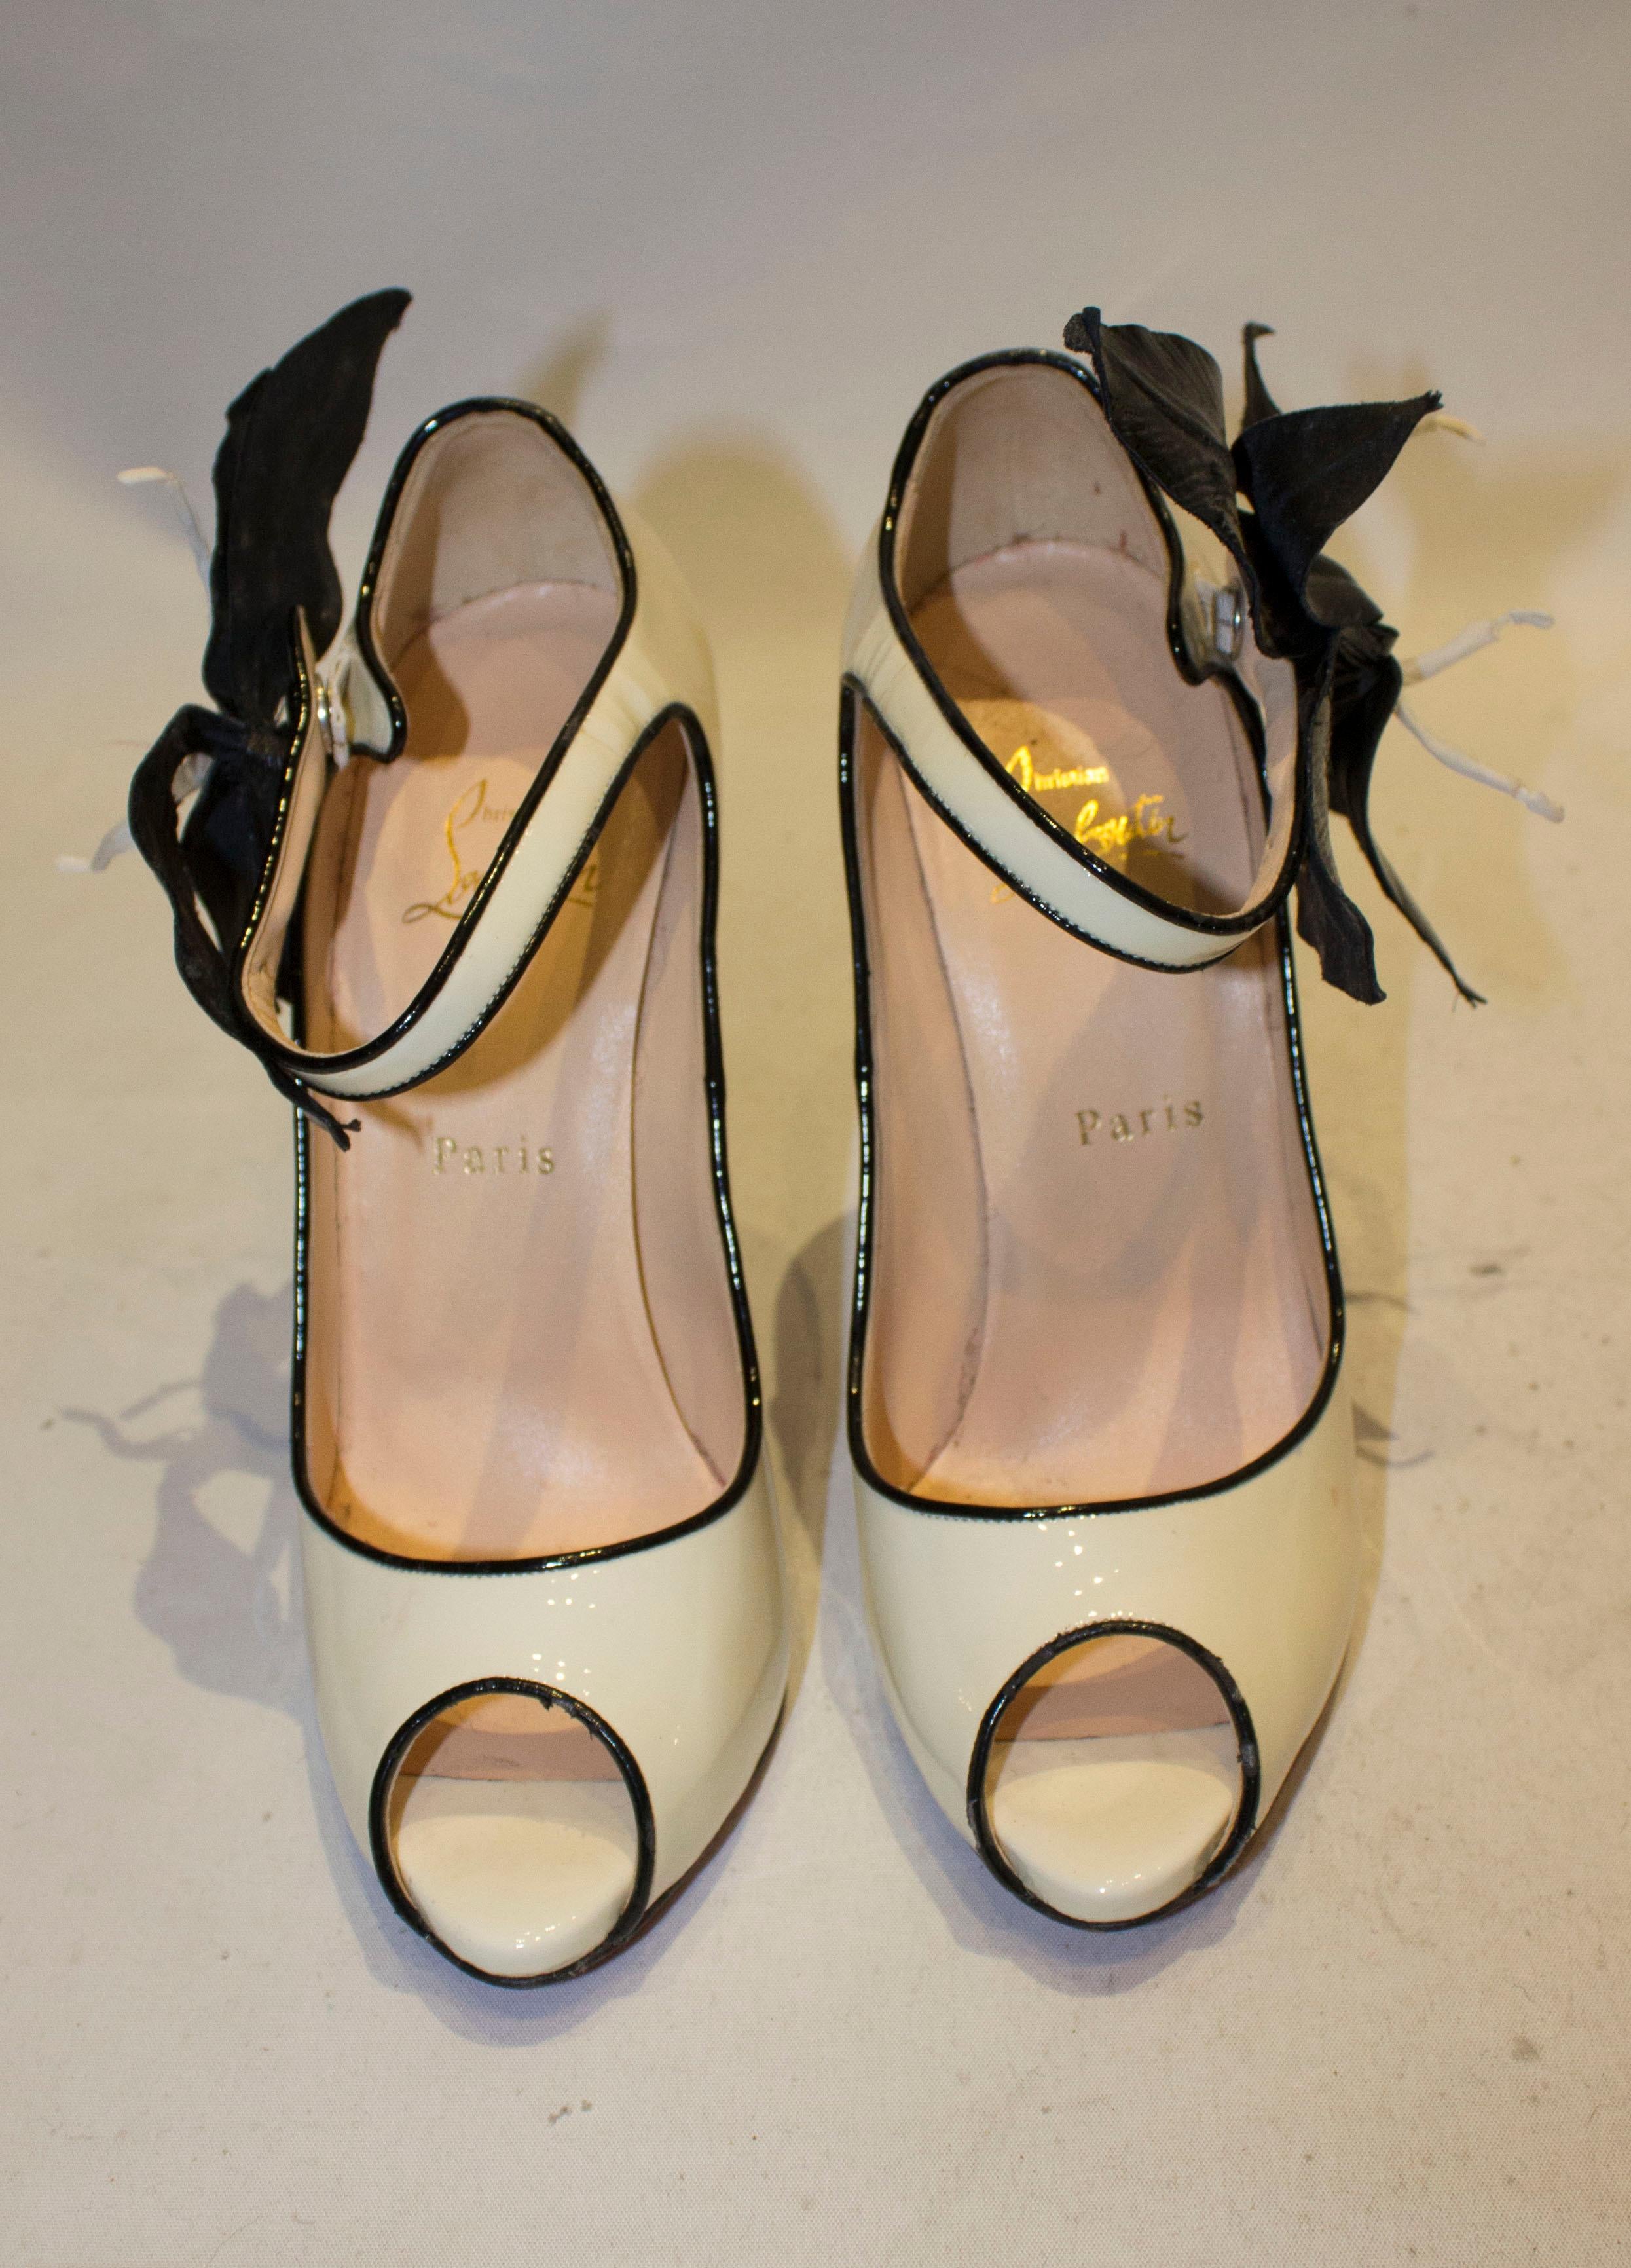 A fun pair of shoes by Christian Louboutin,in patent cream leather with a black trim. The shoes have a peep toe, hidden platform, and ankle strap with popper detail and flower decoration. Size 38 , heel height 5''.